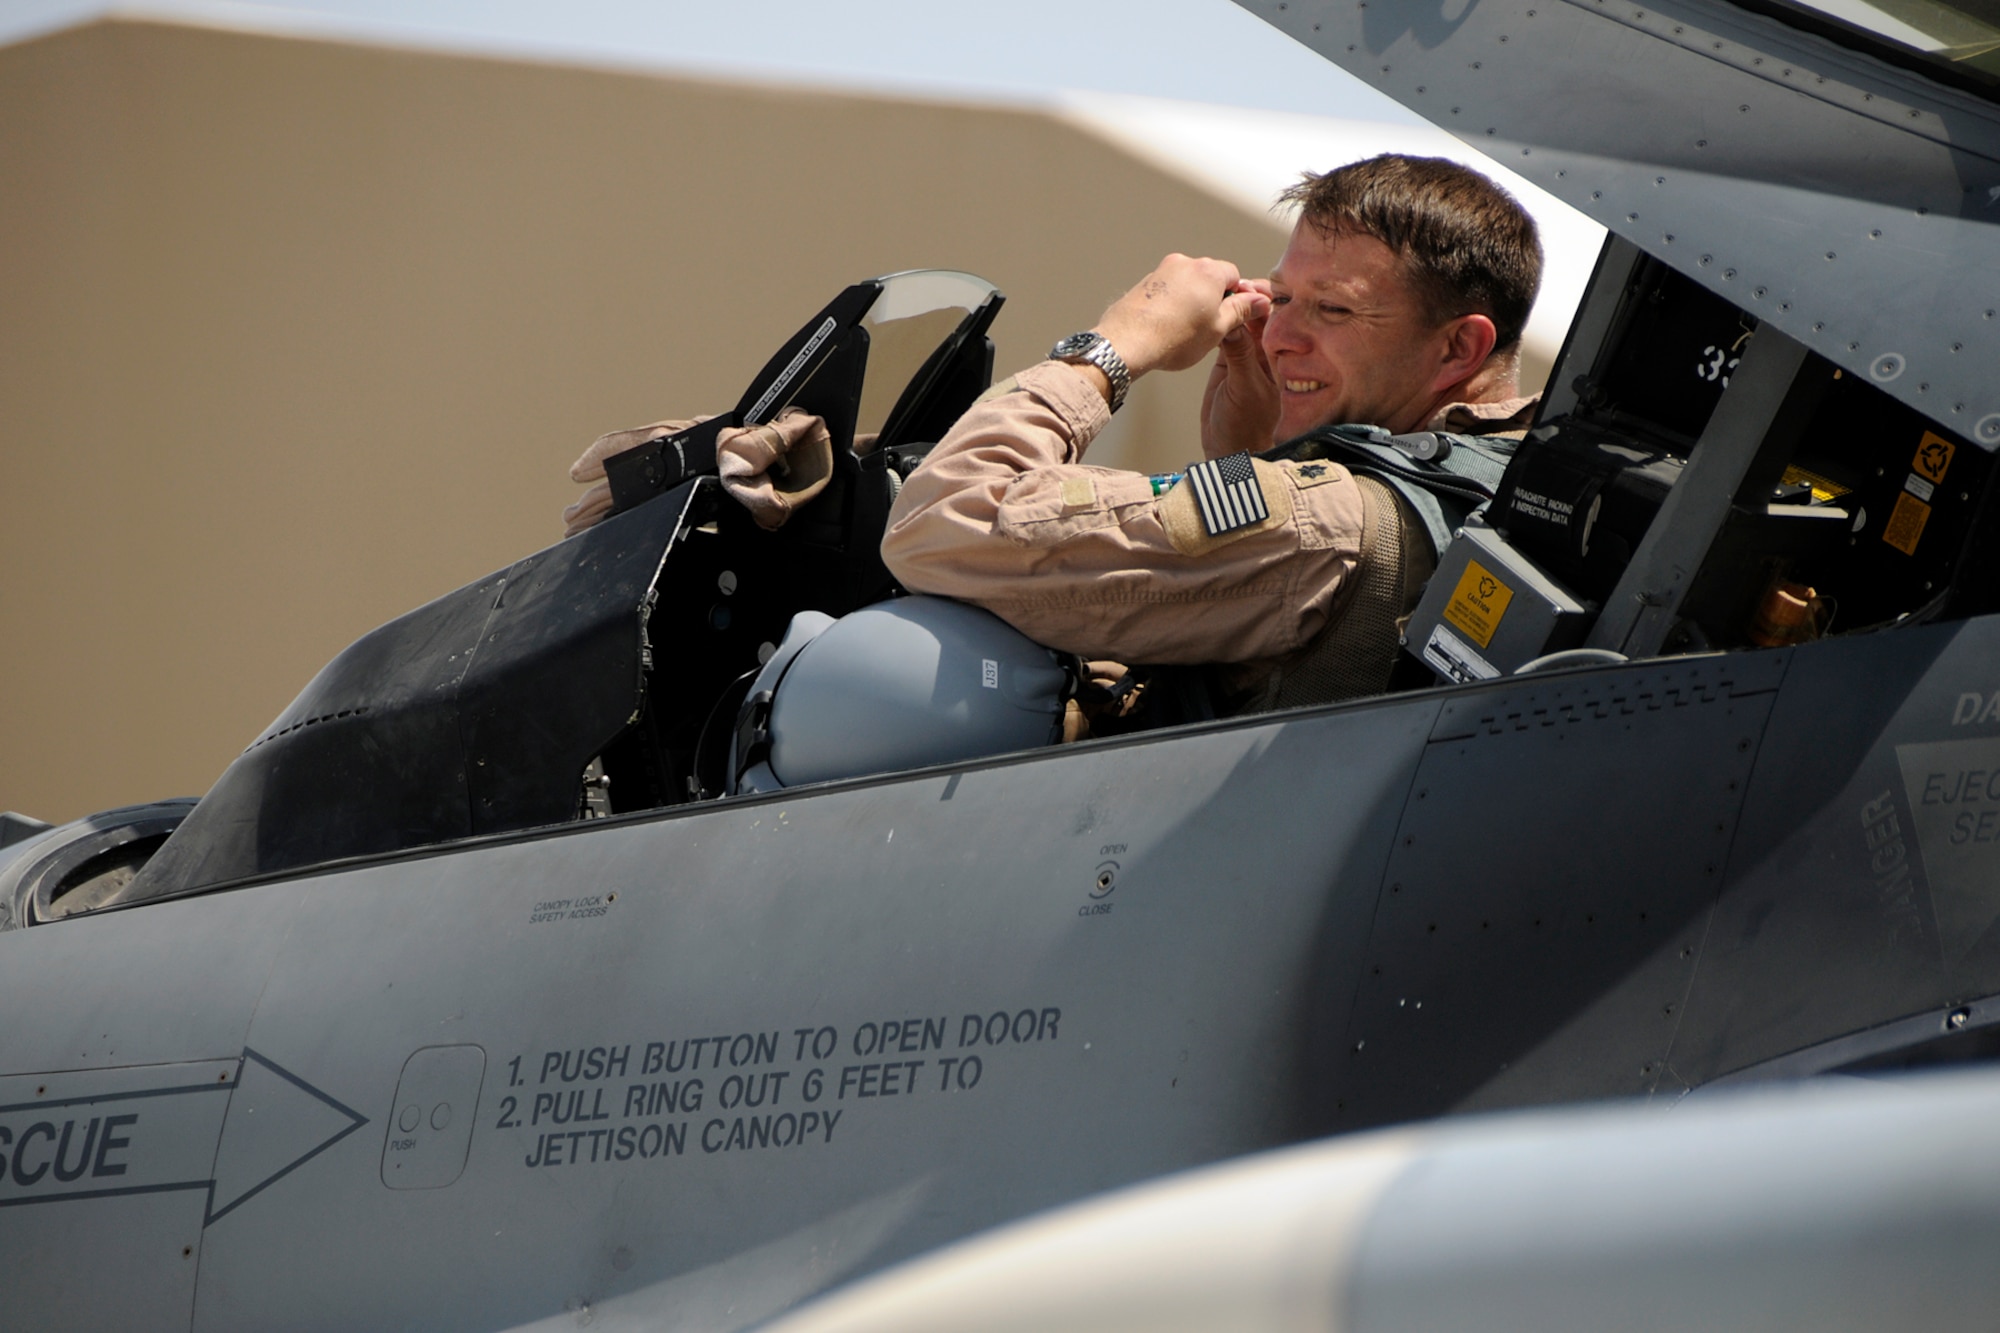 Lieutenant Colonel Michael Rose, a fighter pilot assigned to the 157th Expeditionary Fighter Squadron at Kandahar Airfield, Afghanistan, prepares to launch an F-16 Fighting Falcon for a mission June 7, 2012. Personnel are deployed from McEntire Joint National Guard Base, S.C., in support of Operation Enduring Freedom. Swamp Fox F-16's, pilots, and support personnel began their Air Expeditionary Force deployment early April to take over flying missions for the air tasking order and provide close air support for troops on the ground in Afghanistan.